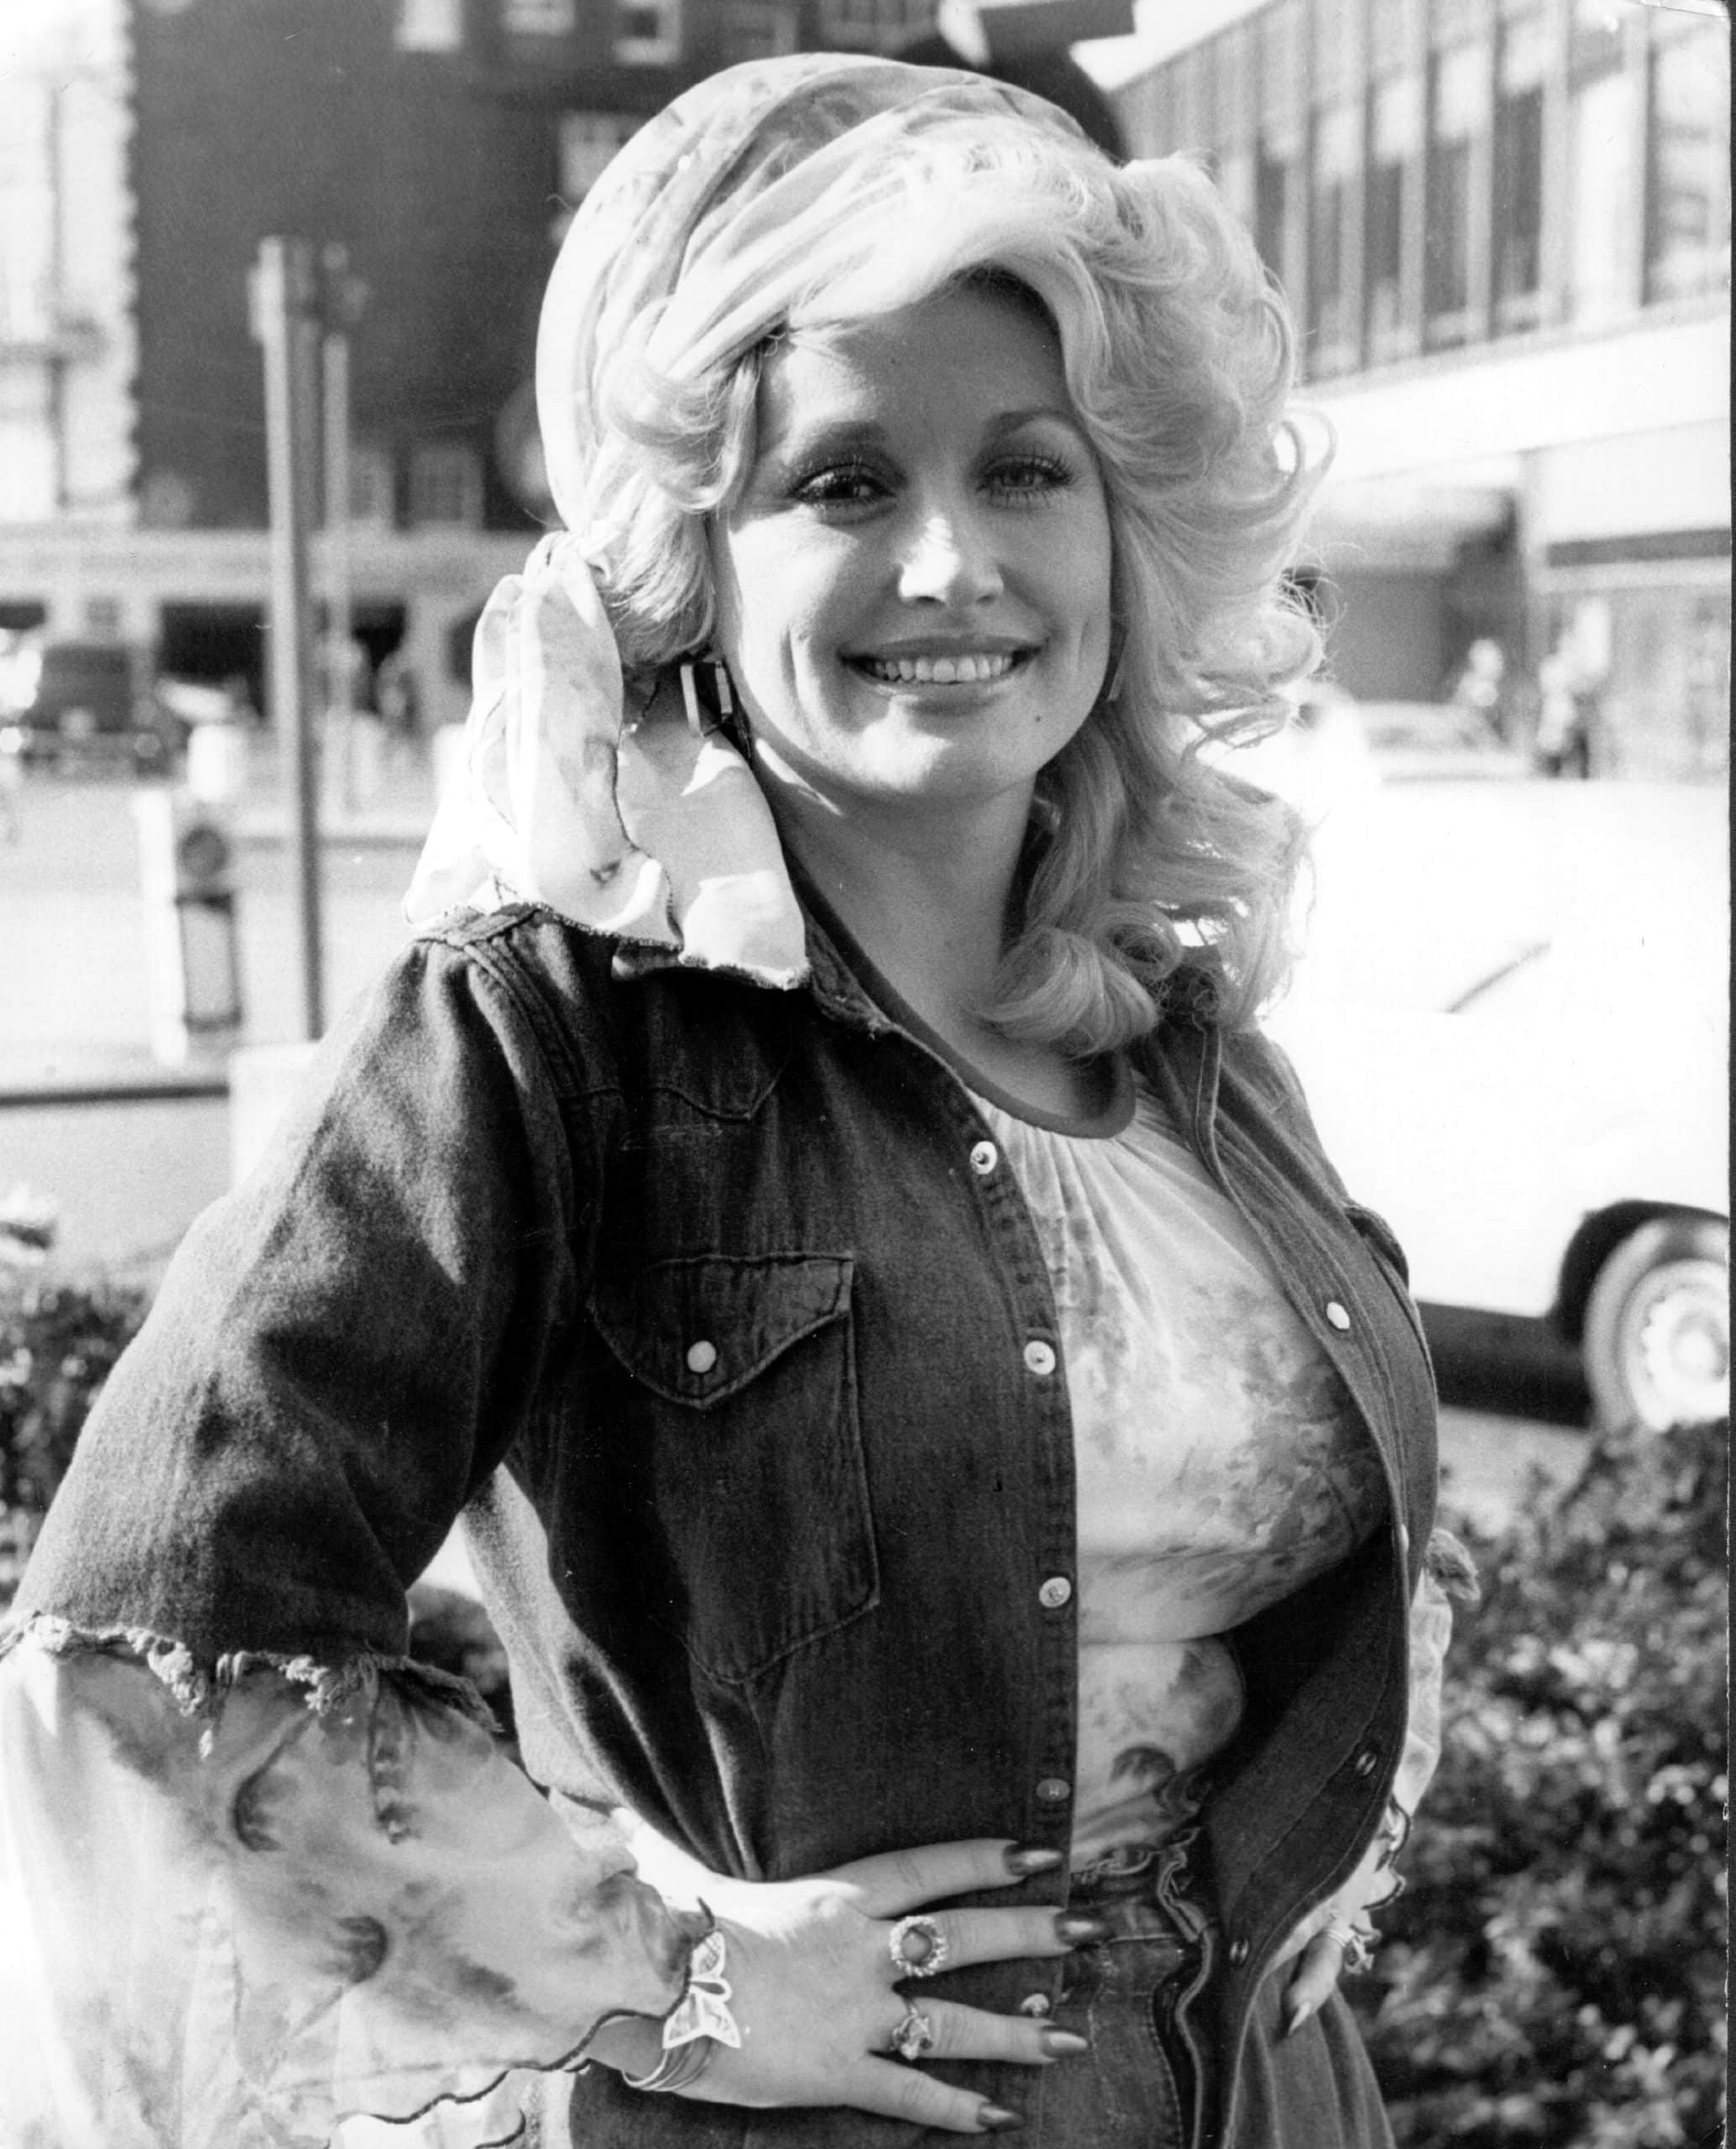 Elvis wanted to record "I Will Always Love You" by Dolly Parton. Here, Dolly is photographed in 1977.